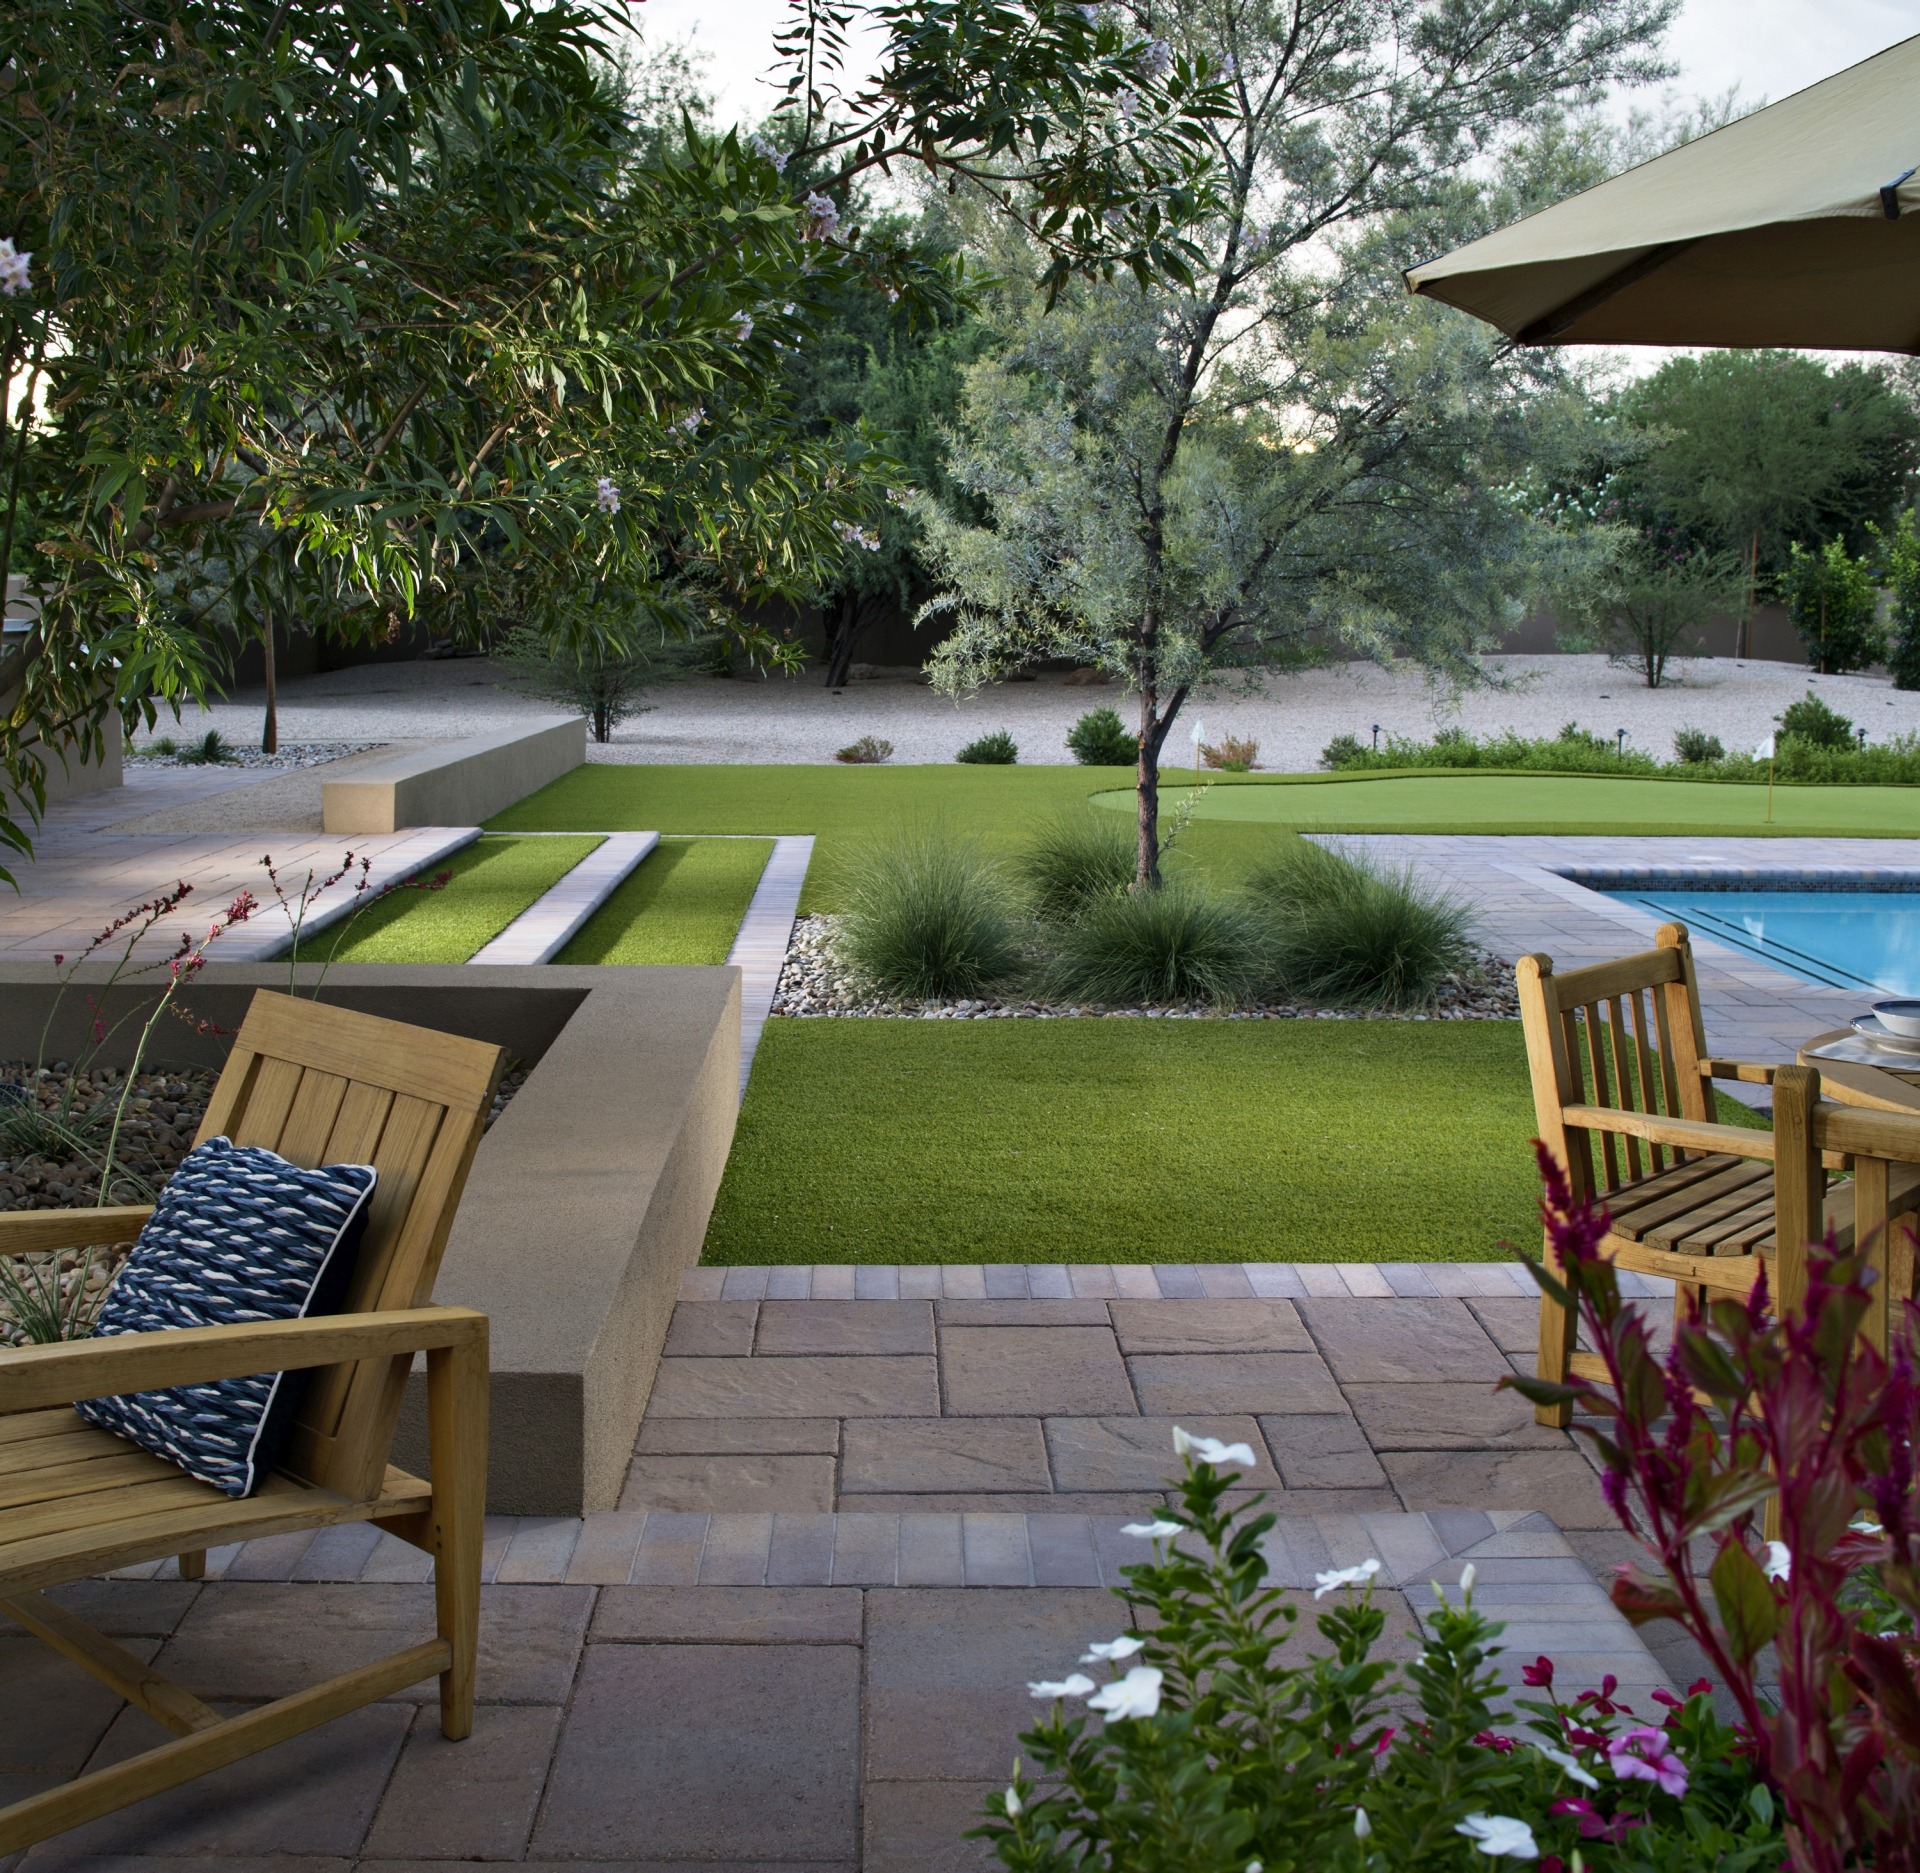 Low Maintenance Landscaping For Large, Big Yard Landscaping Ideas